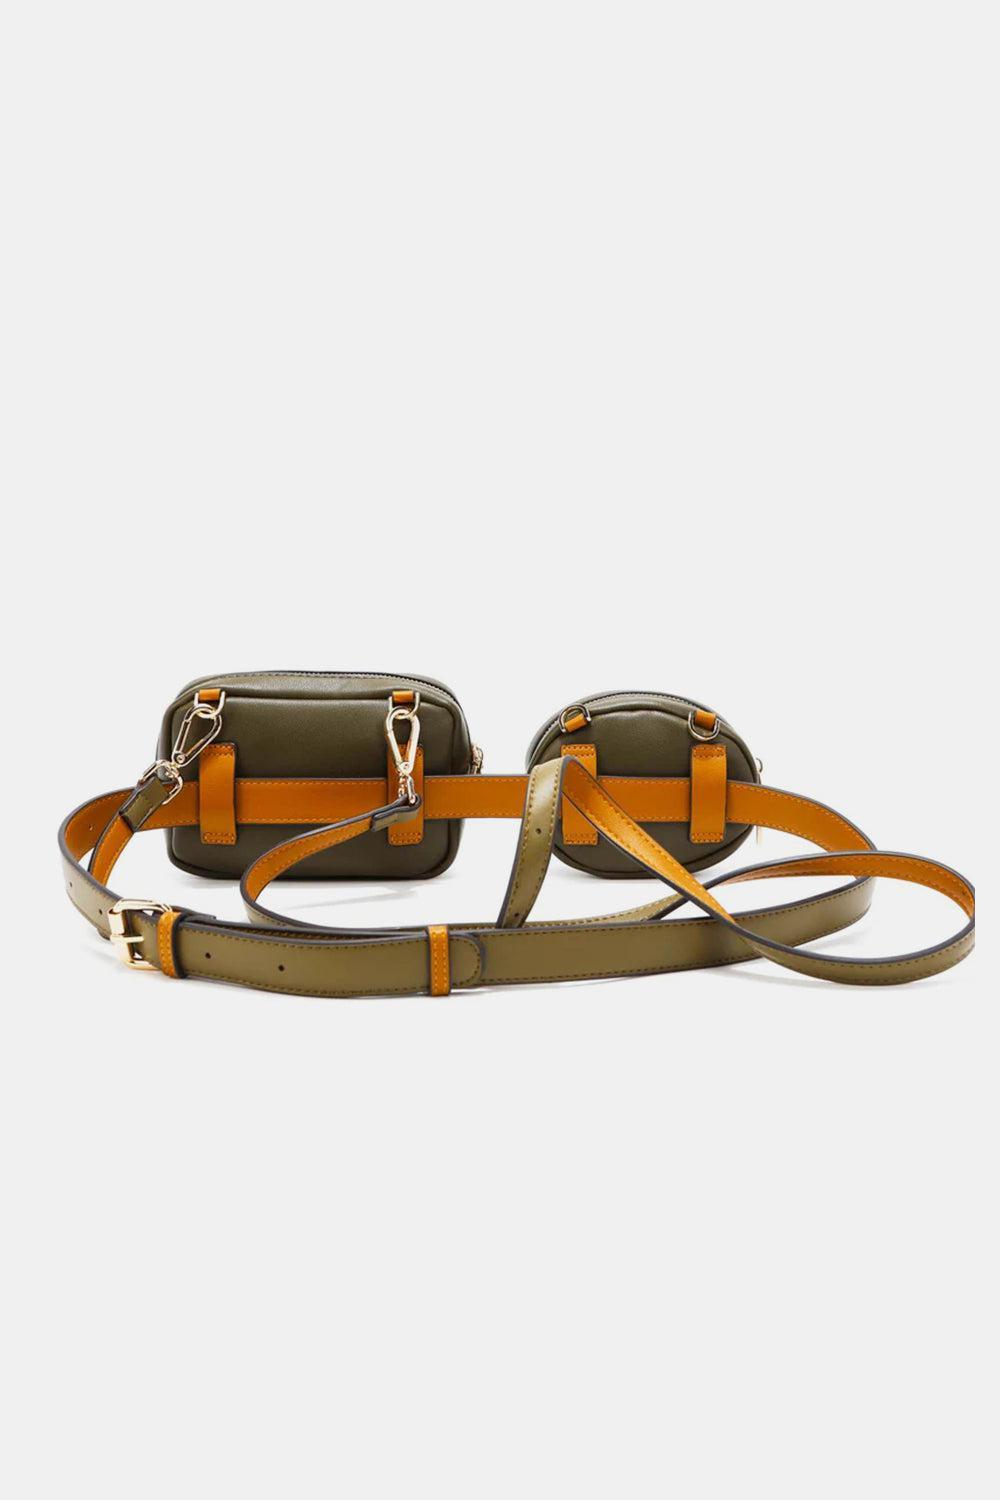 a brown and orange belted bag on a white background